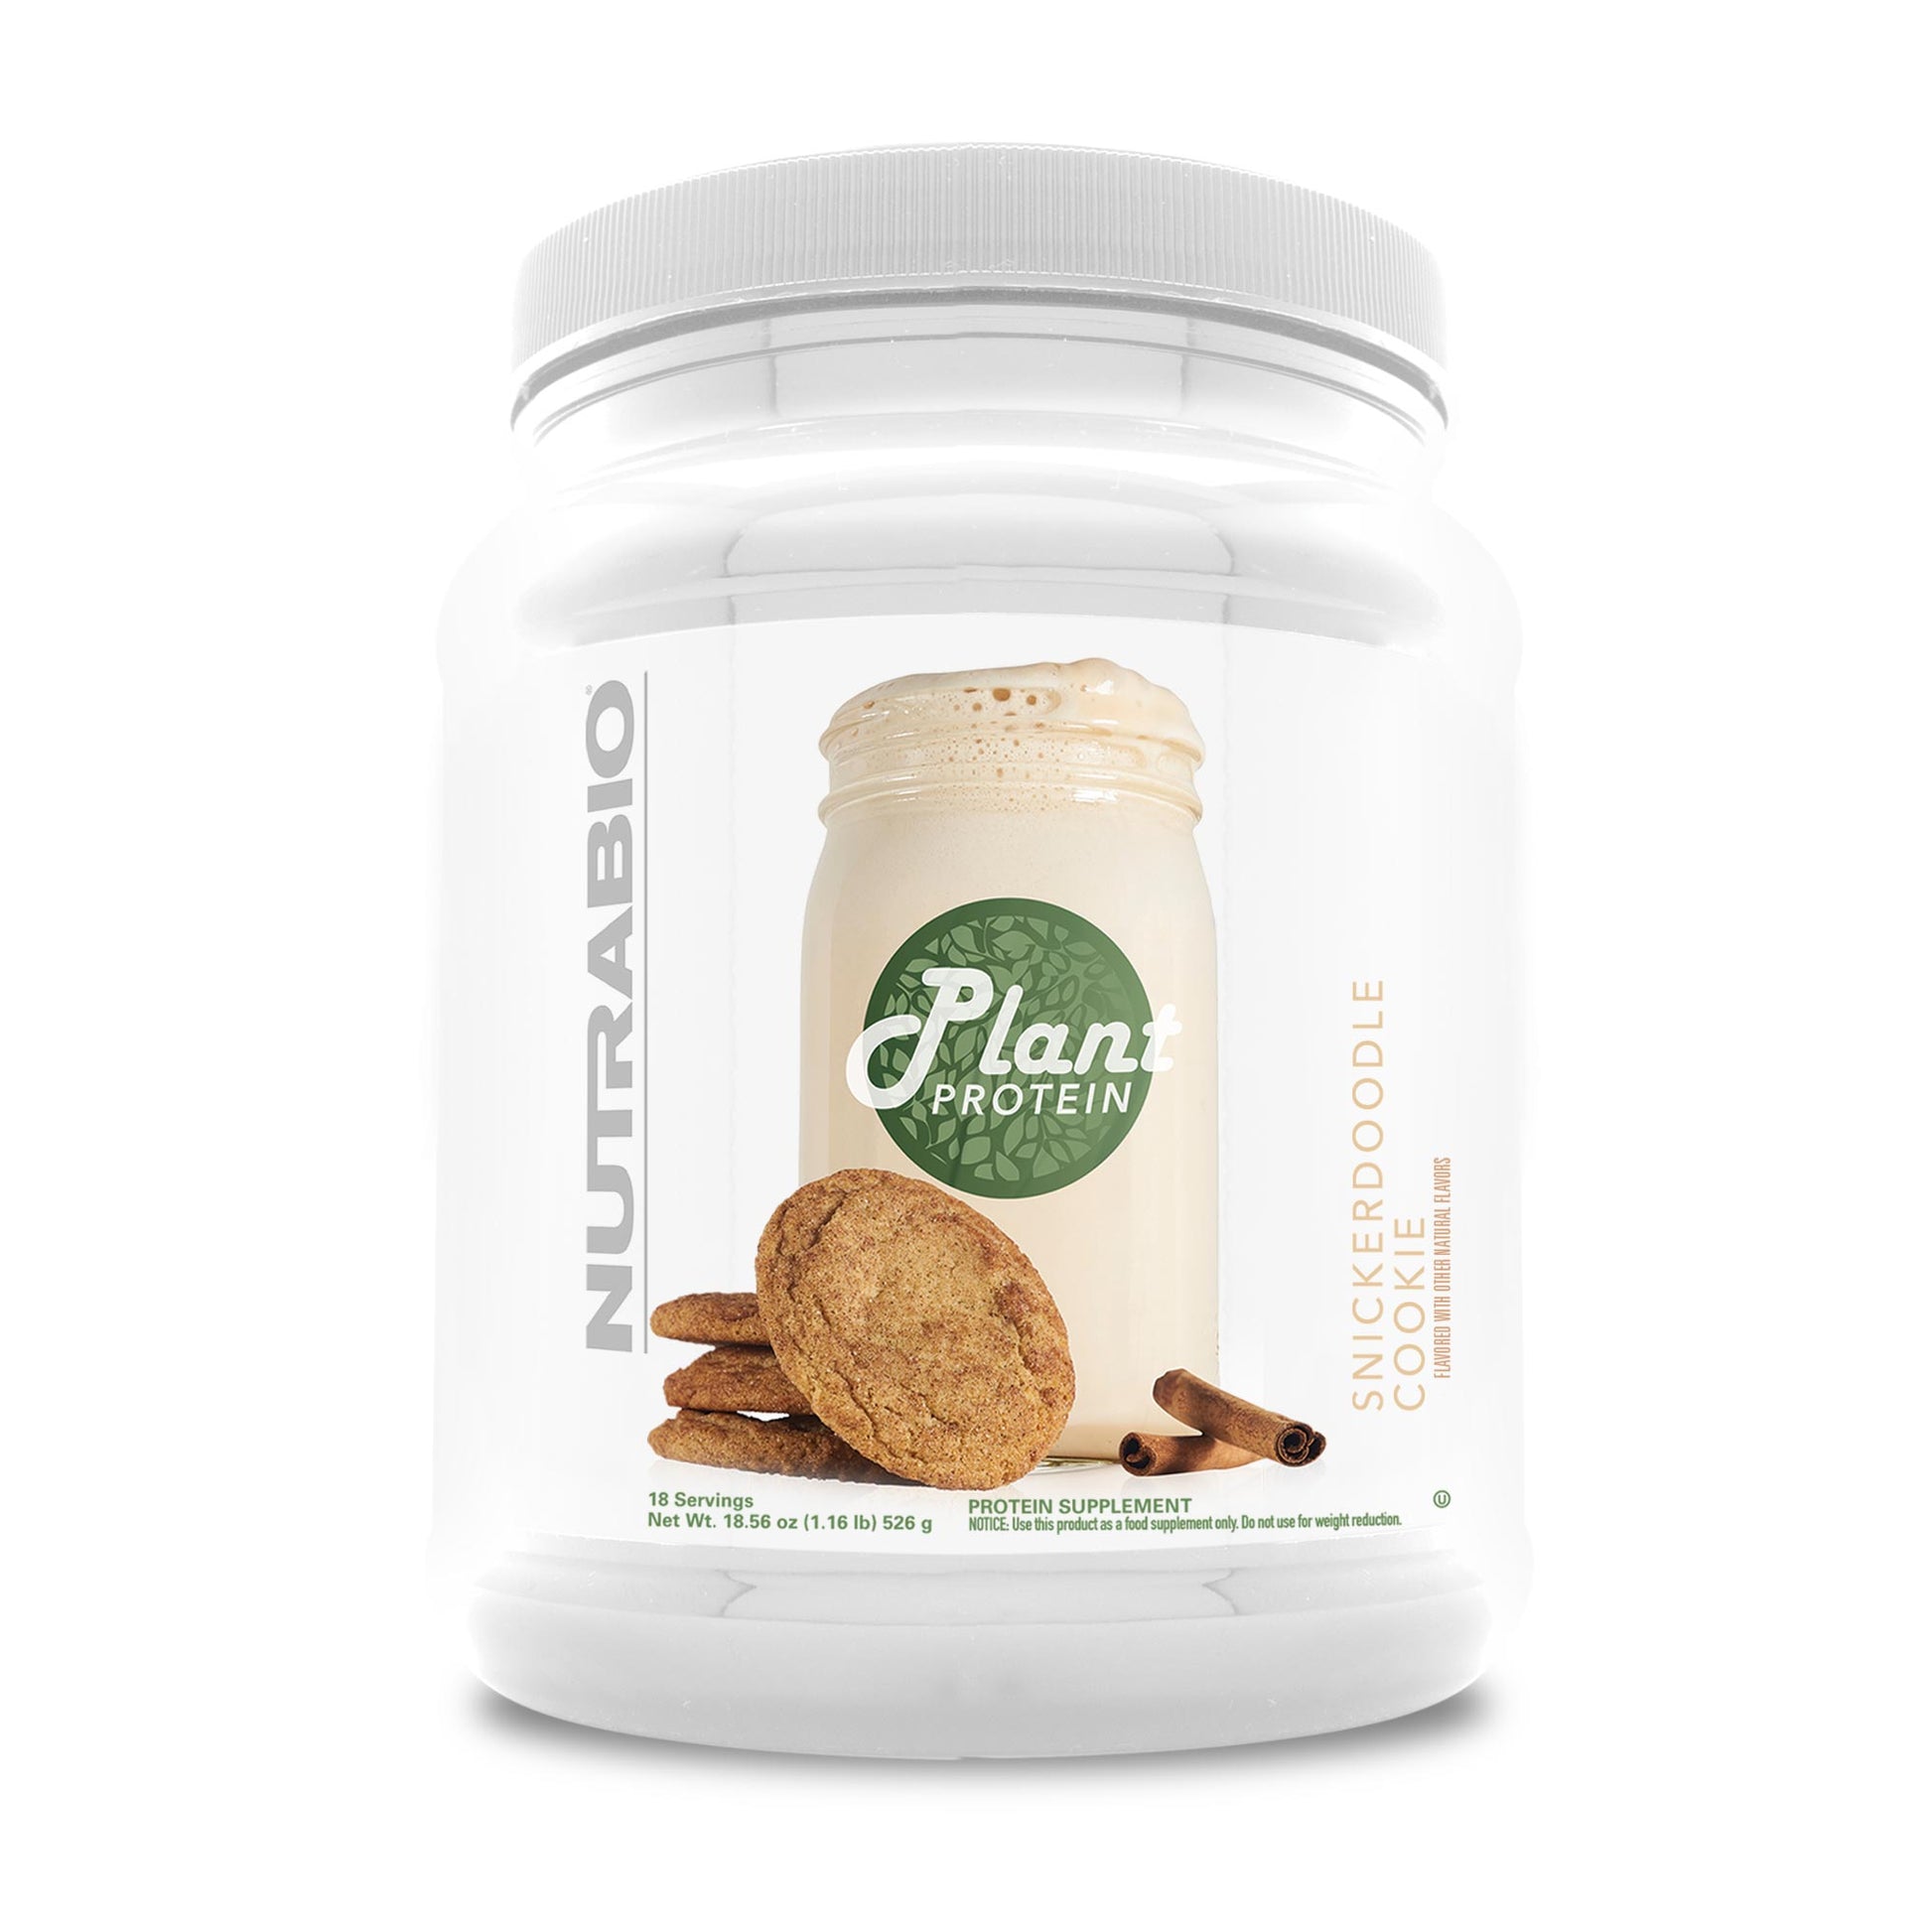 Plant Protein Snickerdoodle Cookie 18 Servings